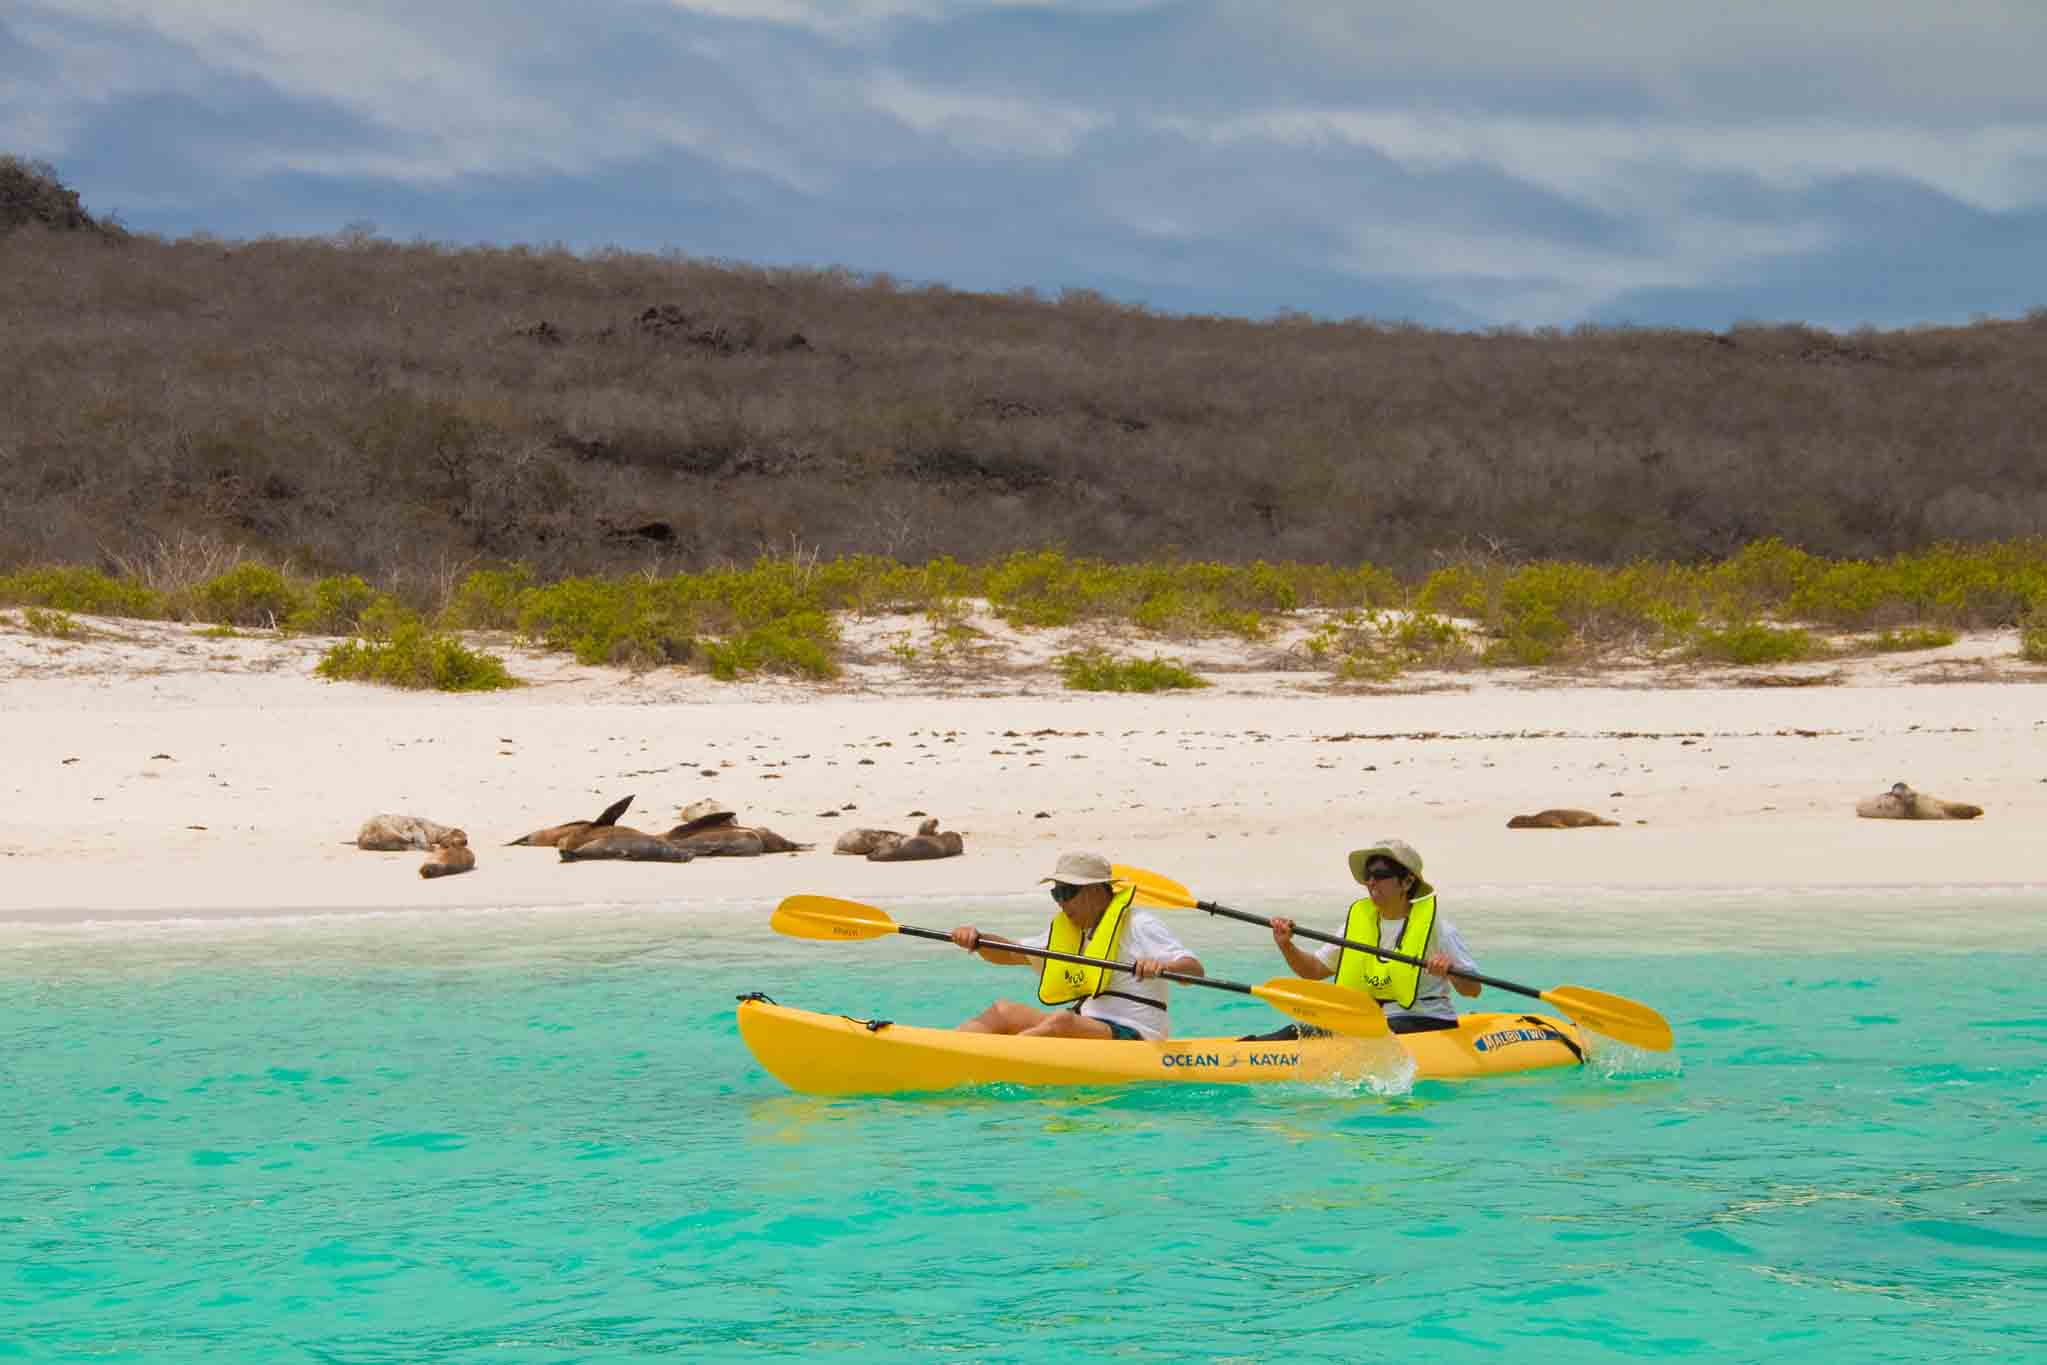 Family Travel to the Galapagos islands – FAQs